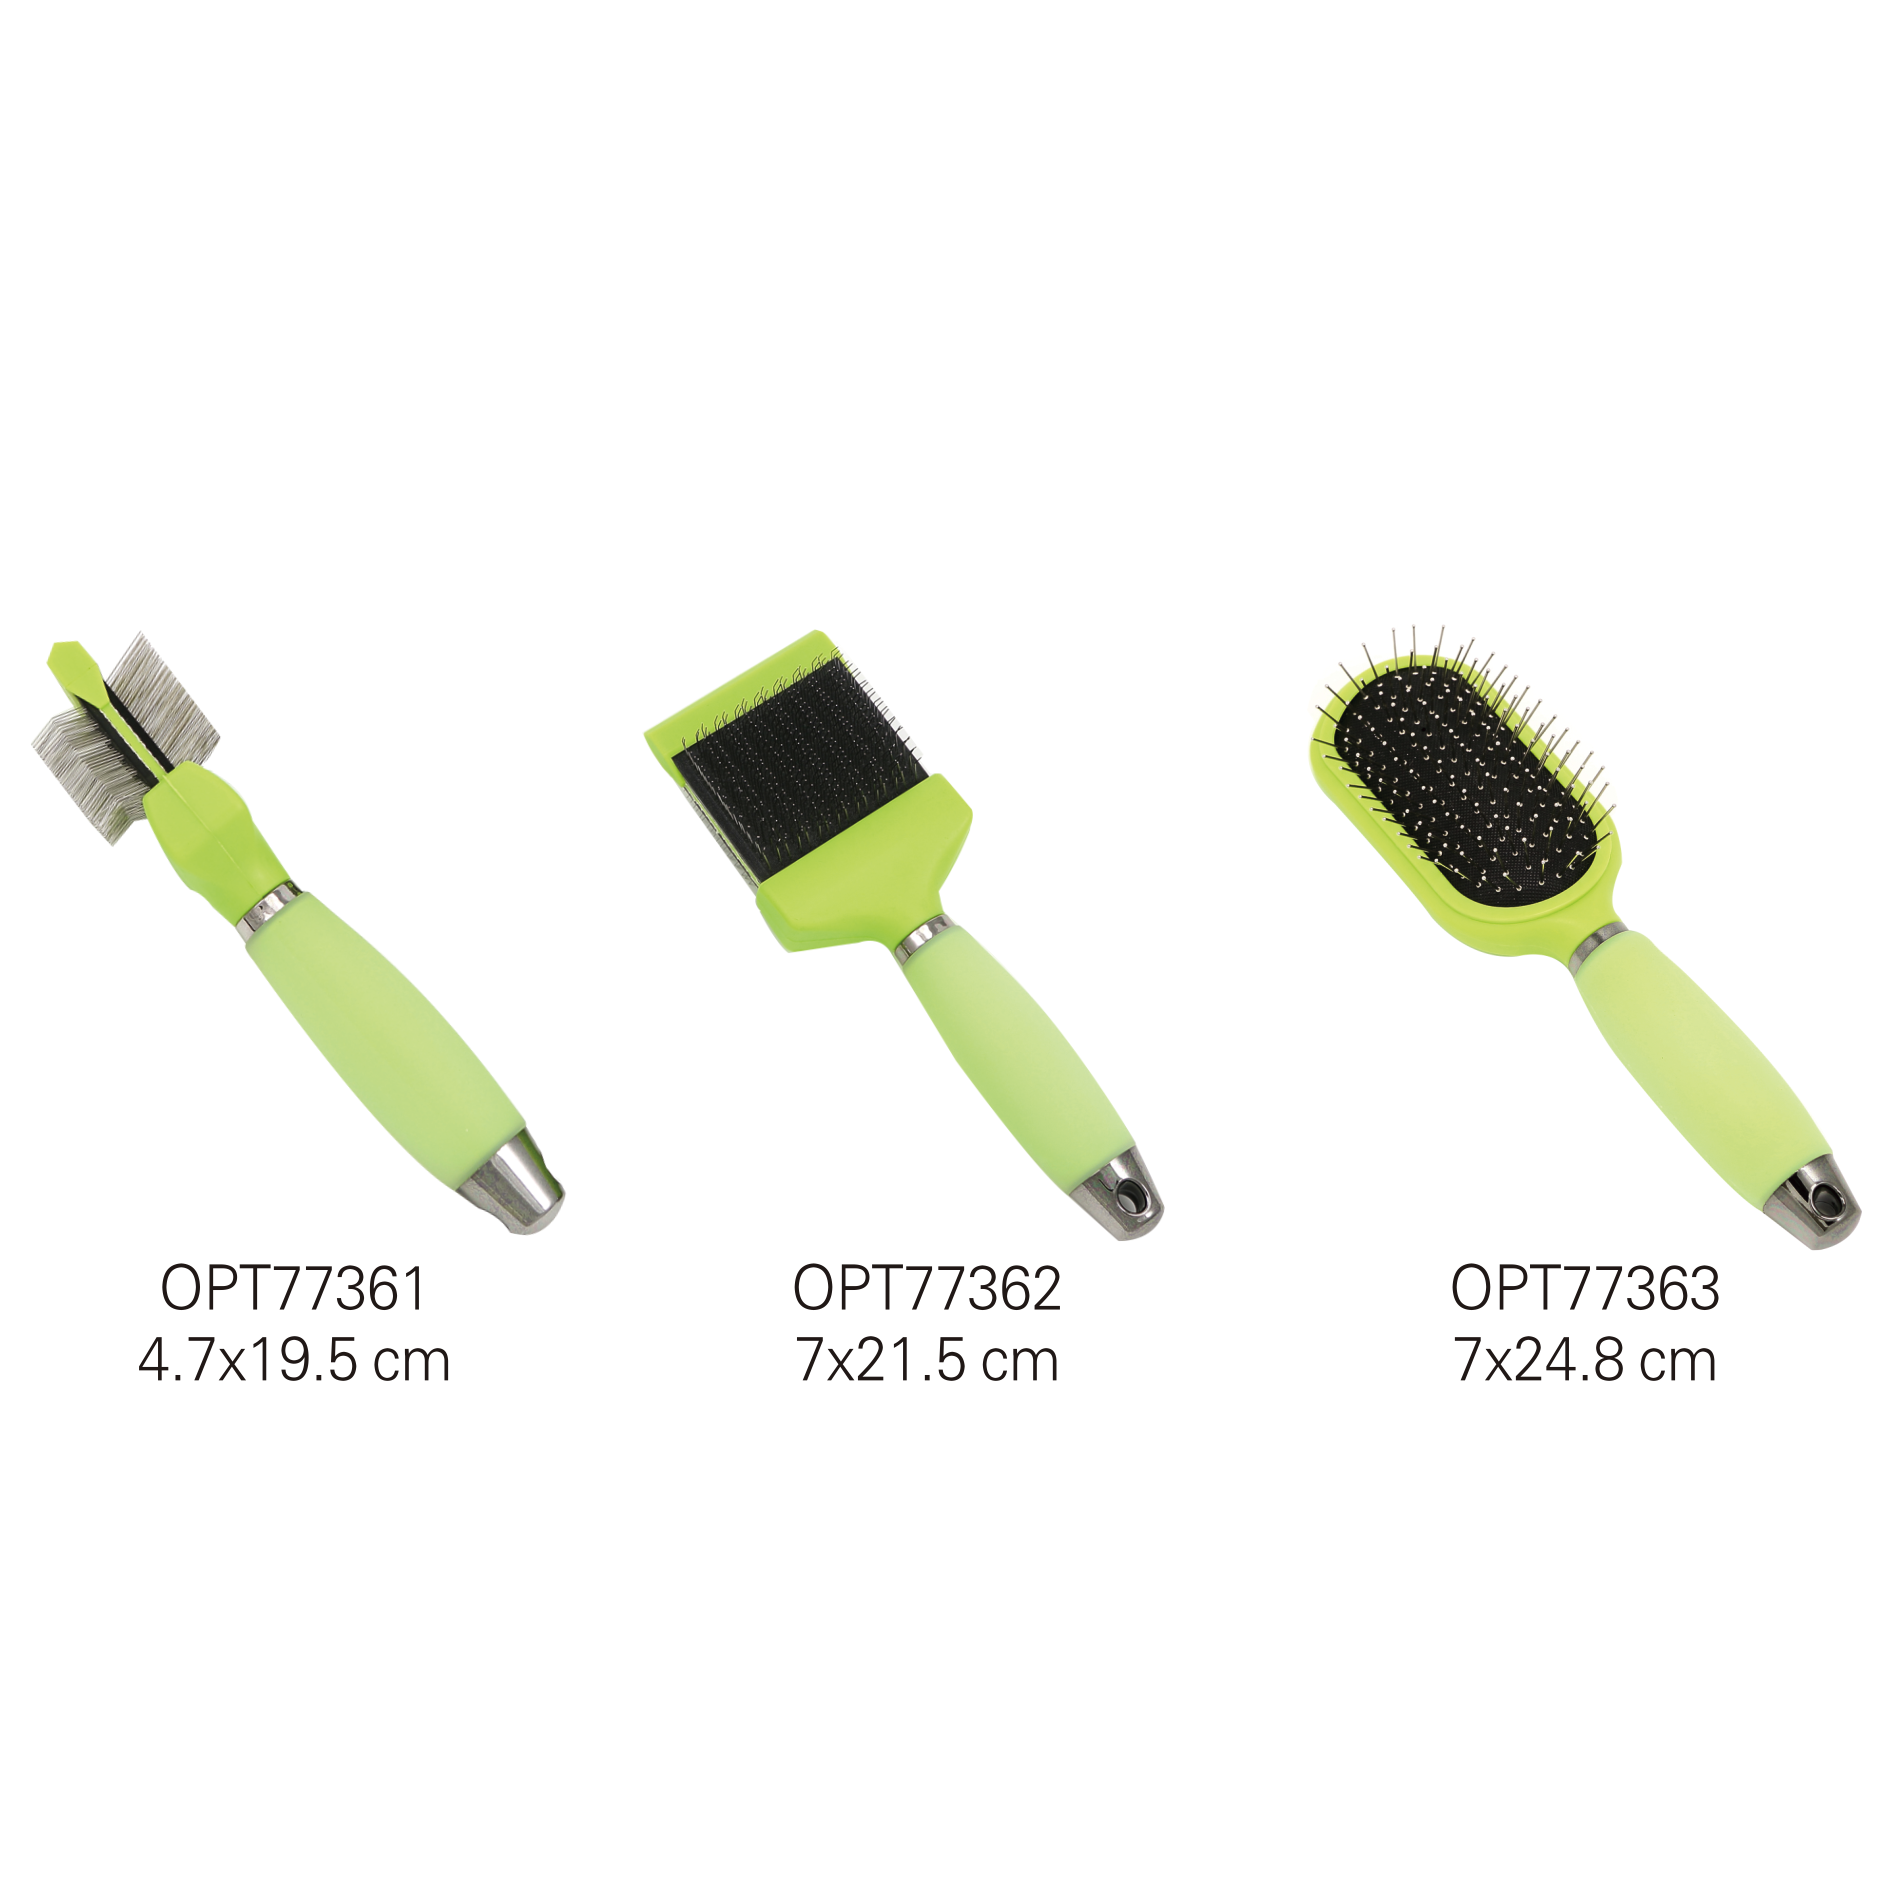 OPT77361-OPT77363 Grooming tools combs & brushes